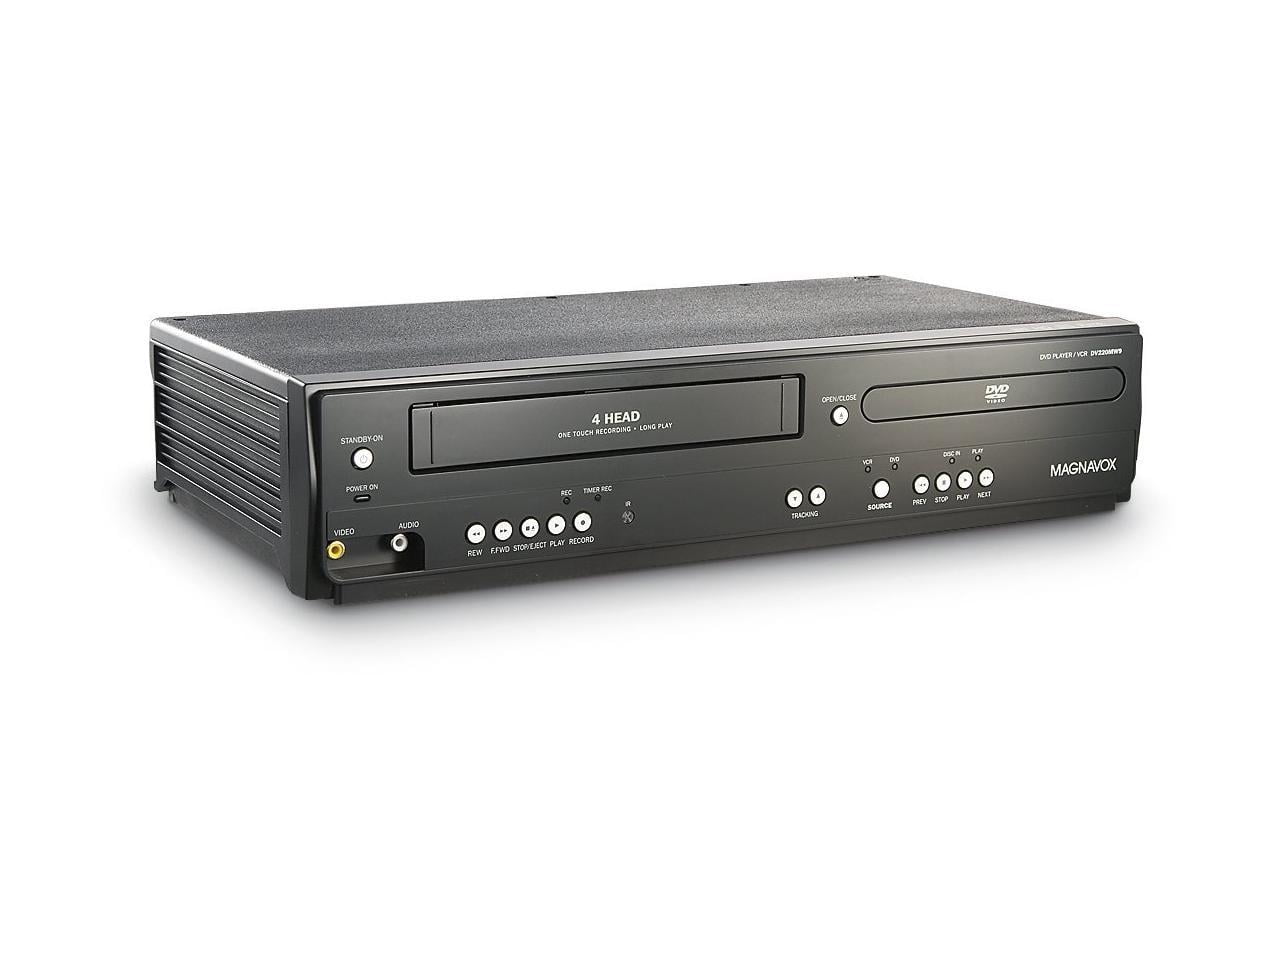 Magnavox DV220MW9 (REFURBISHED) DVD/VCR Combo Player with Remote